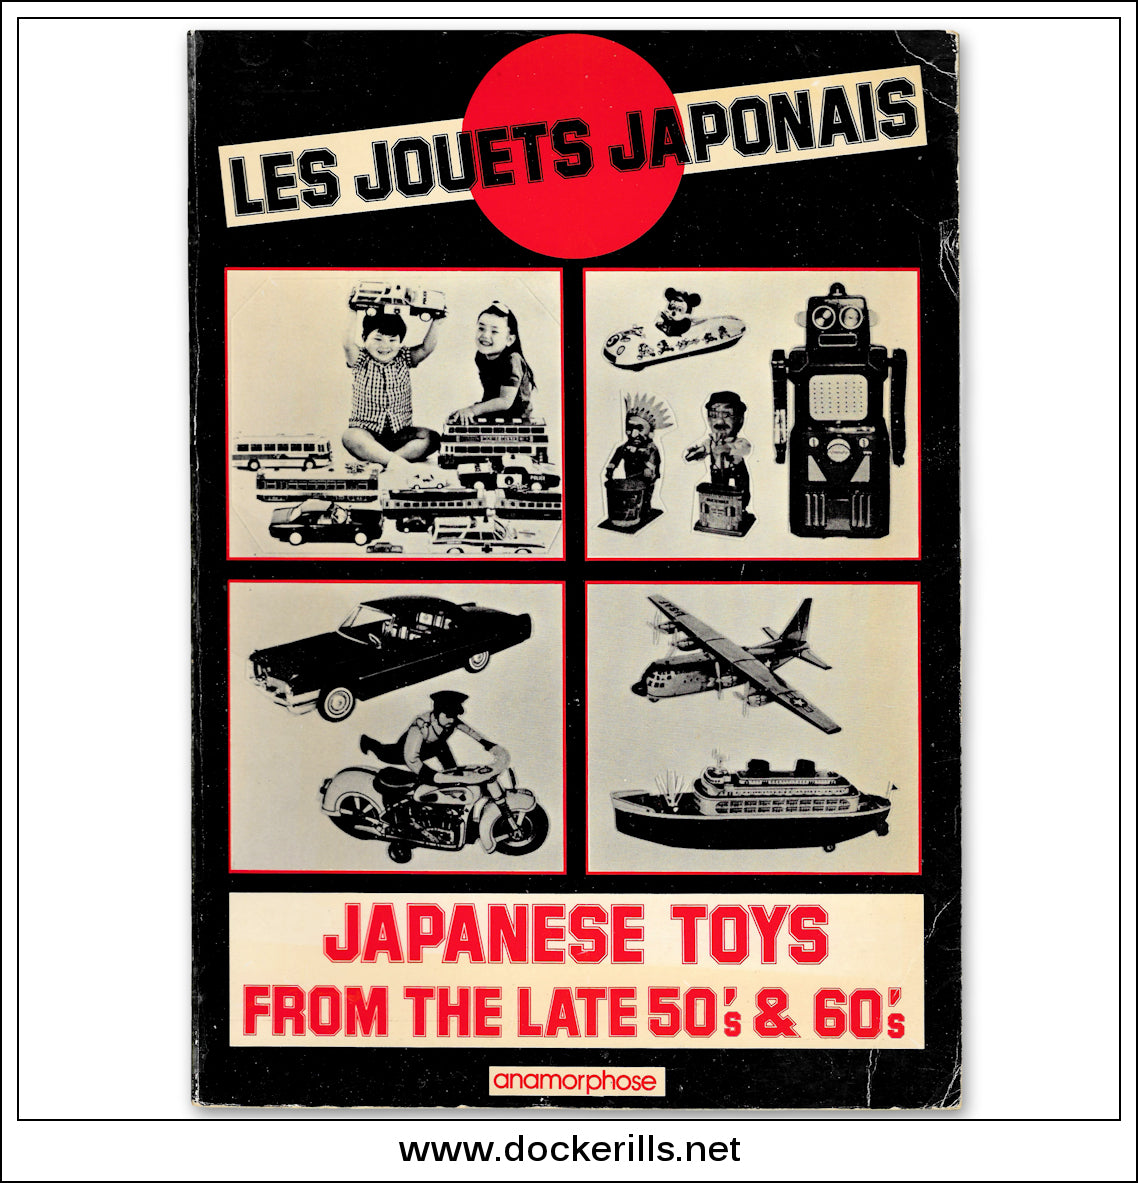 Les Jouets Japonais / Japanese Toys From The Late 1950's & 60's